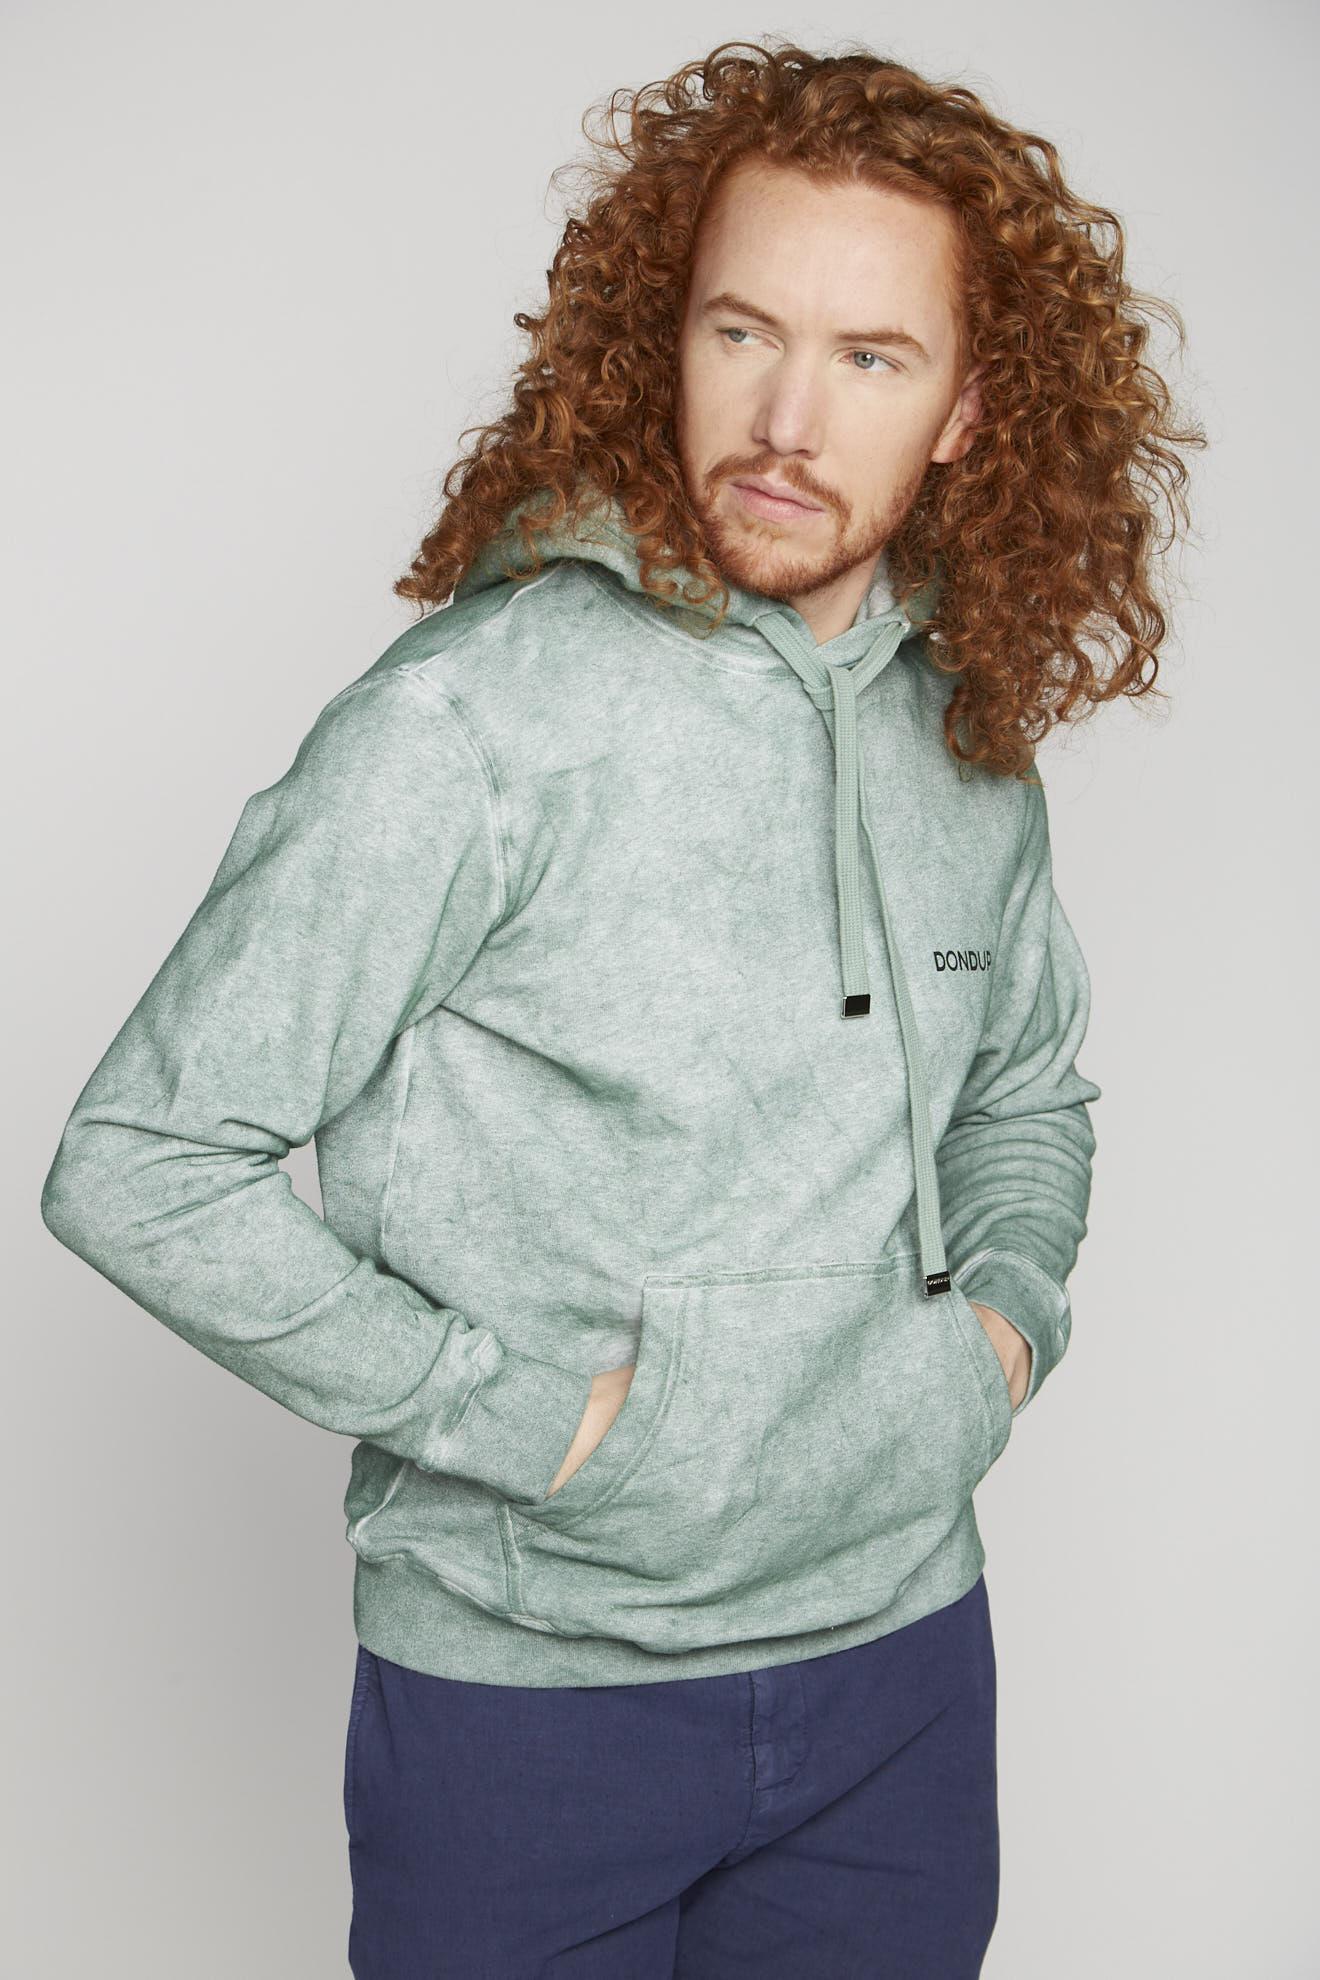 dondup hoodie washed out green branded cotton model frontansicht